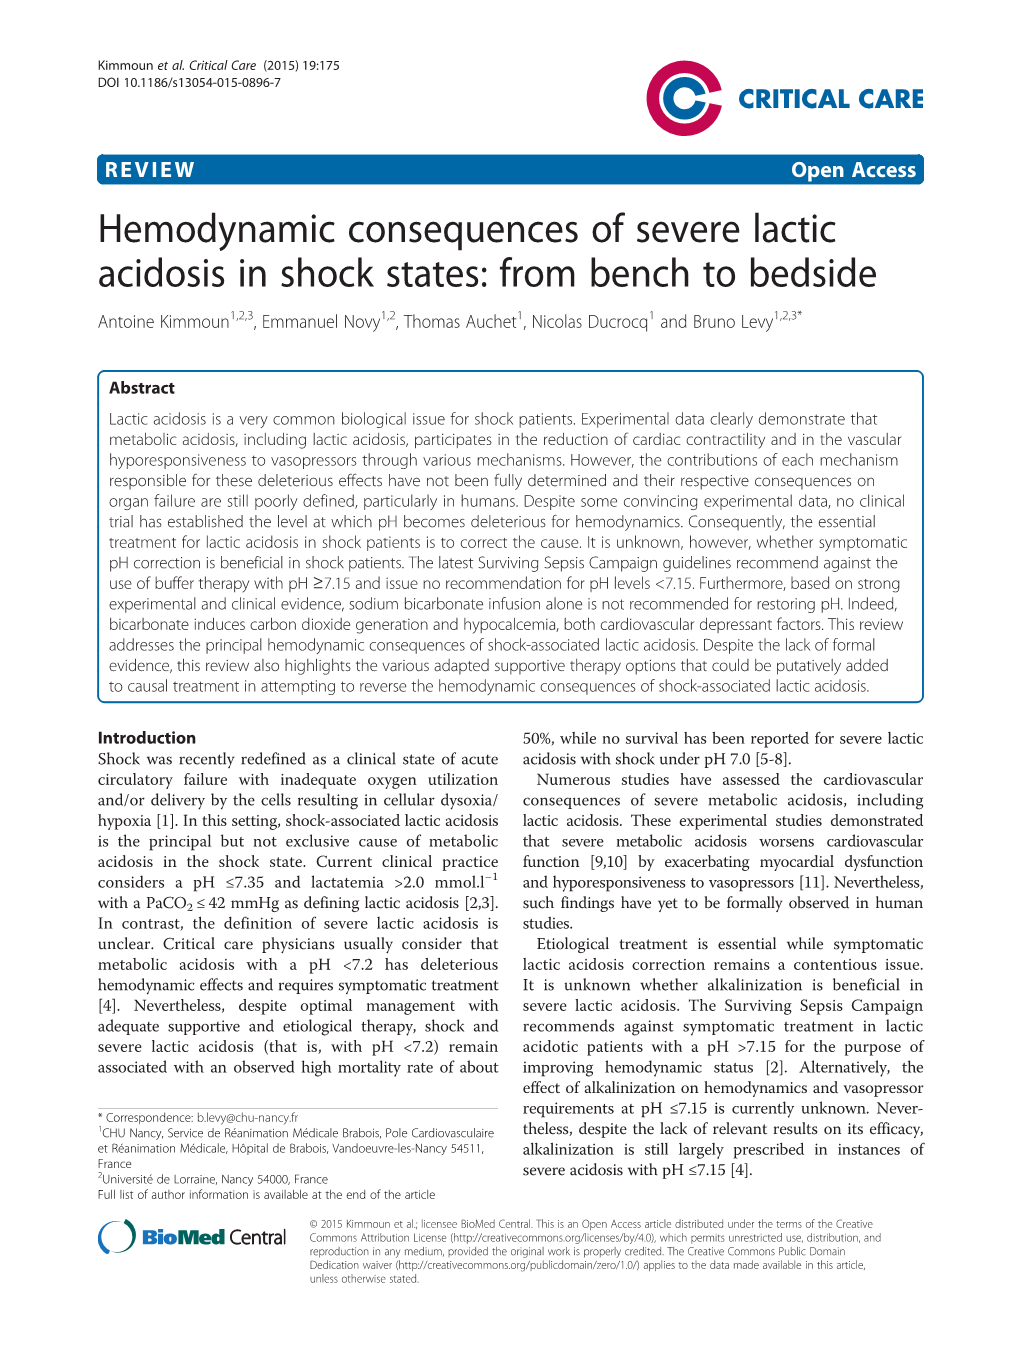 Hemodynamic Consequences of Severe Lactic Acidosis in Shock States